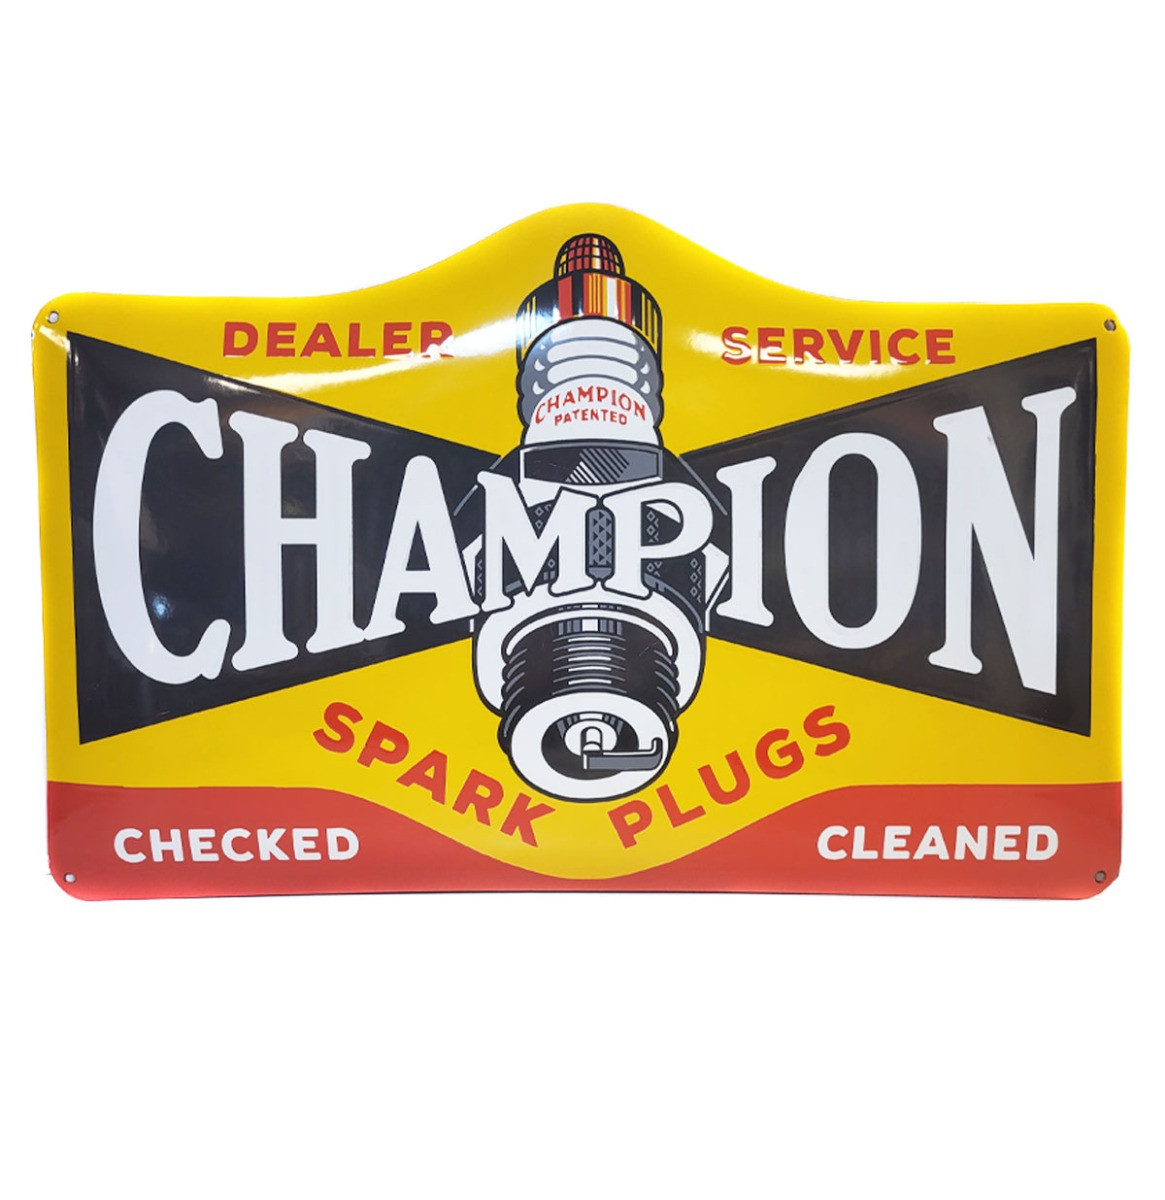 Champion Spark Plugs Emaille Bord - 69 x 46 cm